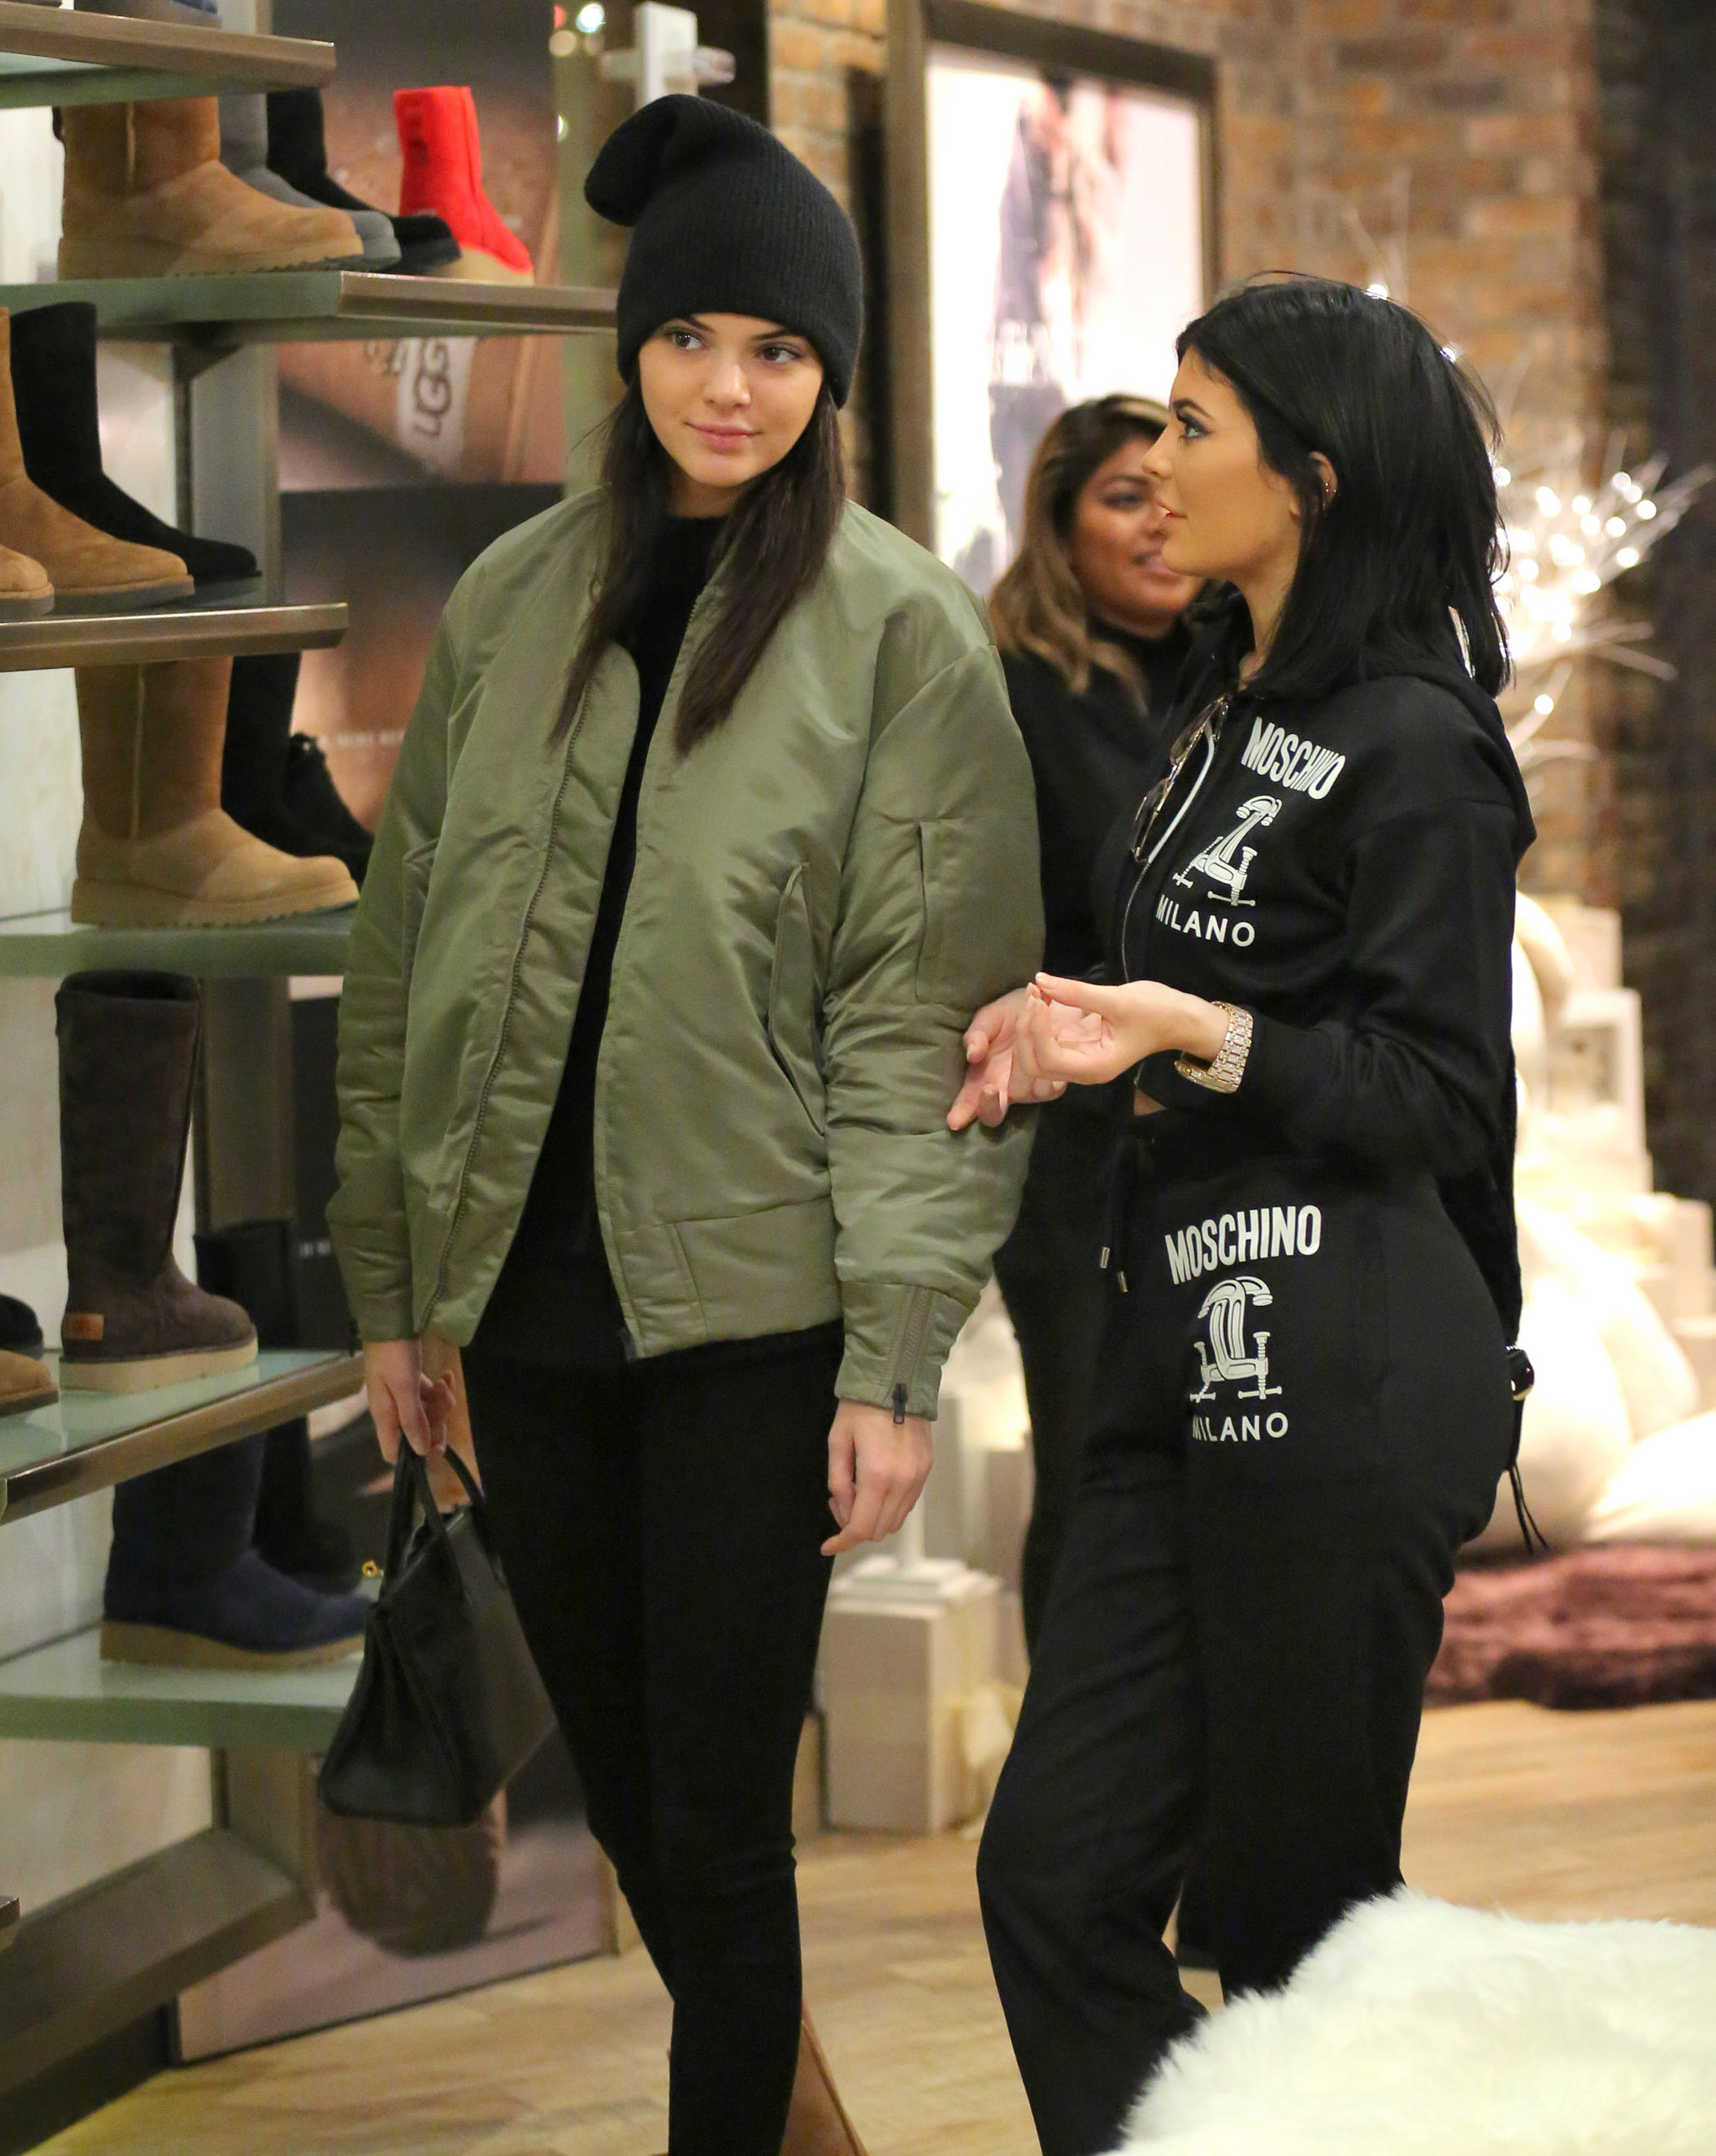 Kylie Jenner and Kendall Jenner at the UGG store in NYC